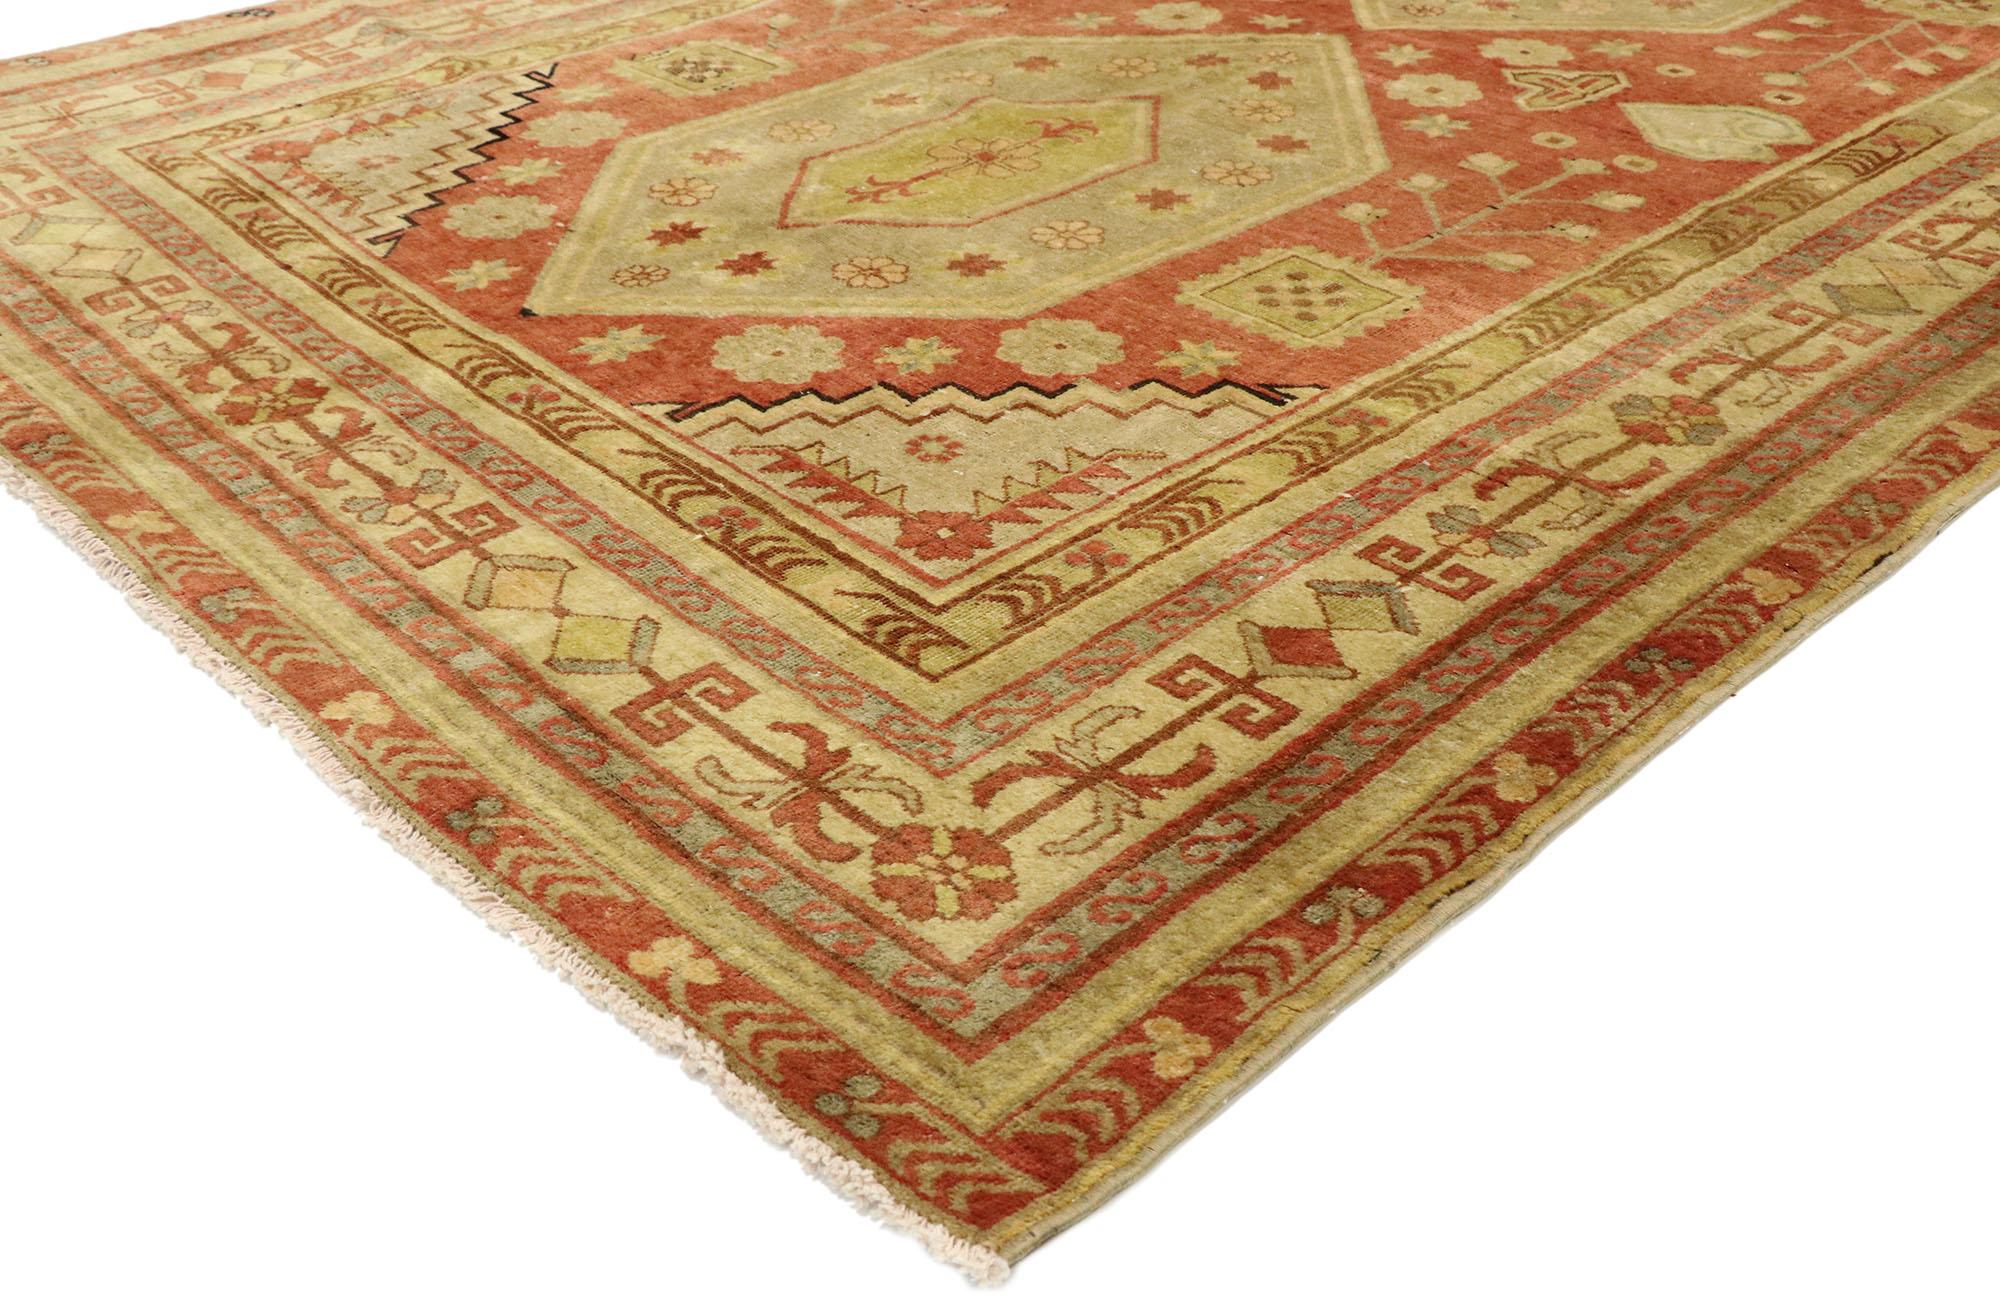 53044, vintage Turkish Oushak rug with Northwestern Tribal style. Rustic sensibility and down-to-earth vibes meet Northwestern tribal style in this hand knotted wool vintage Turkish Oushak rug. The abrashed red field features two concentric